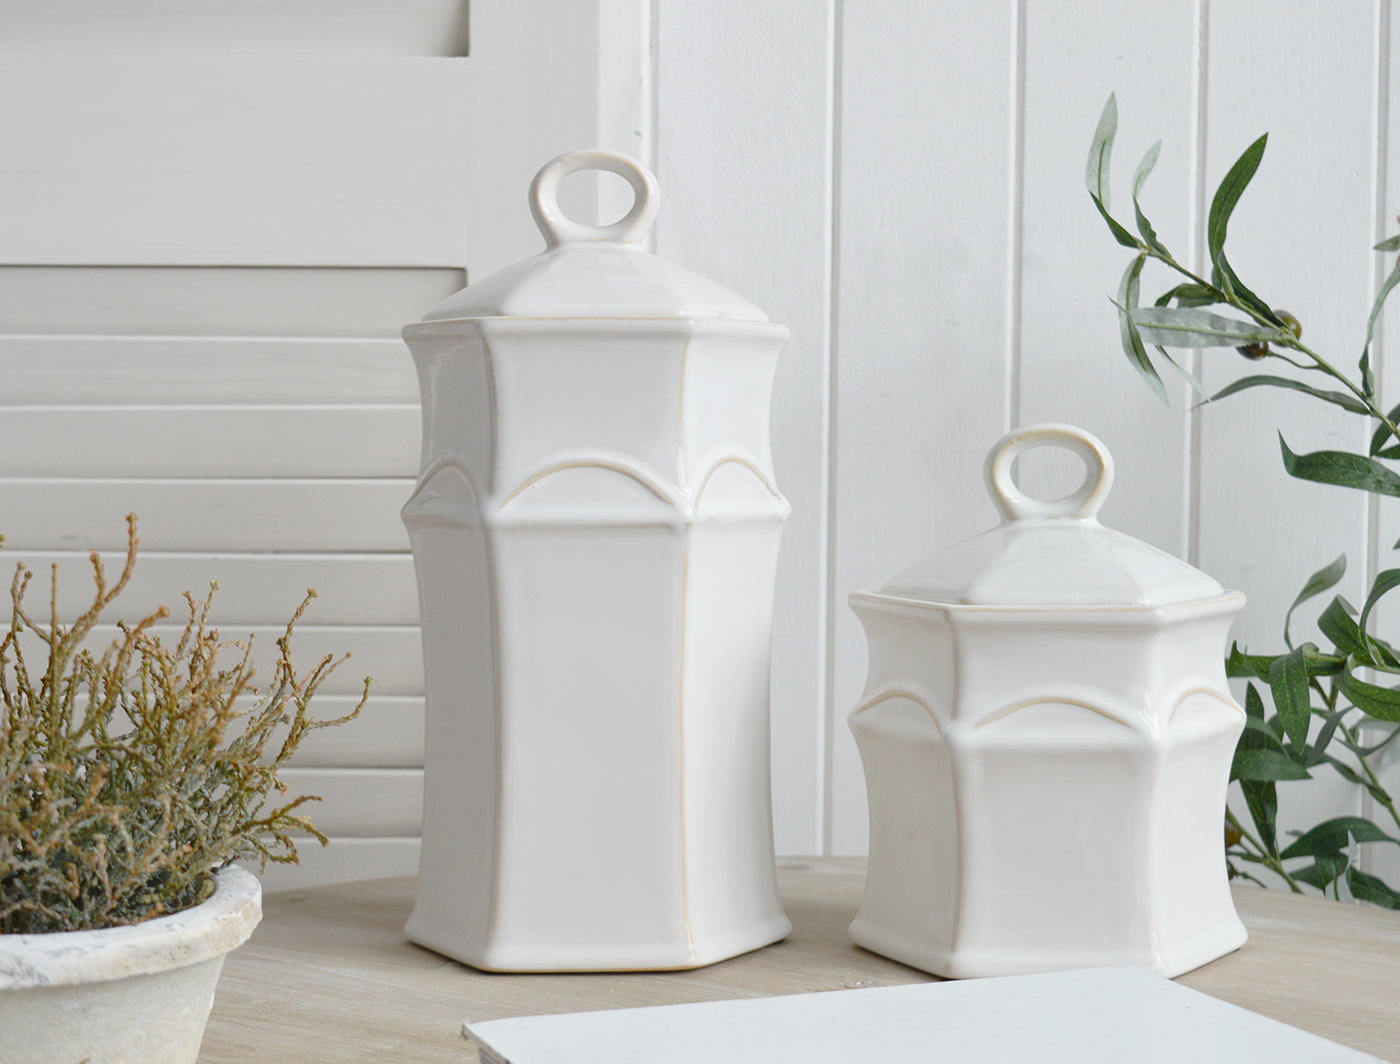 White Ceramics - Porter ceramic jar - Console Table Styling in Hamptons Styled Home Interior